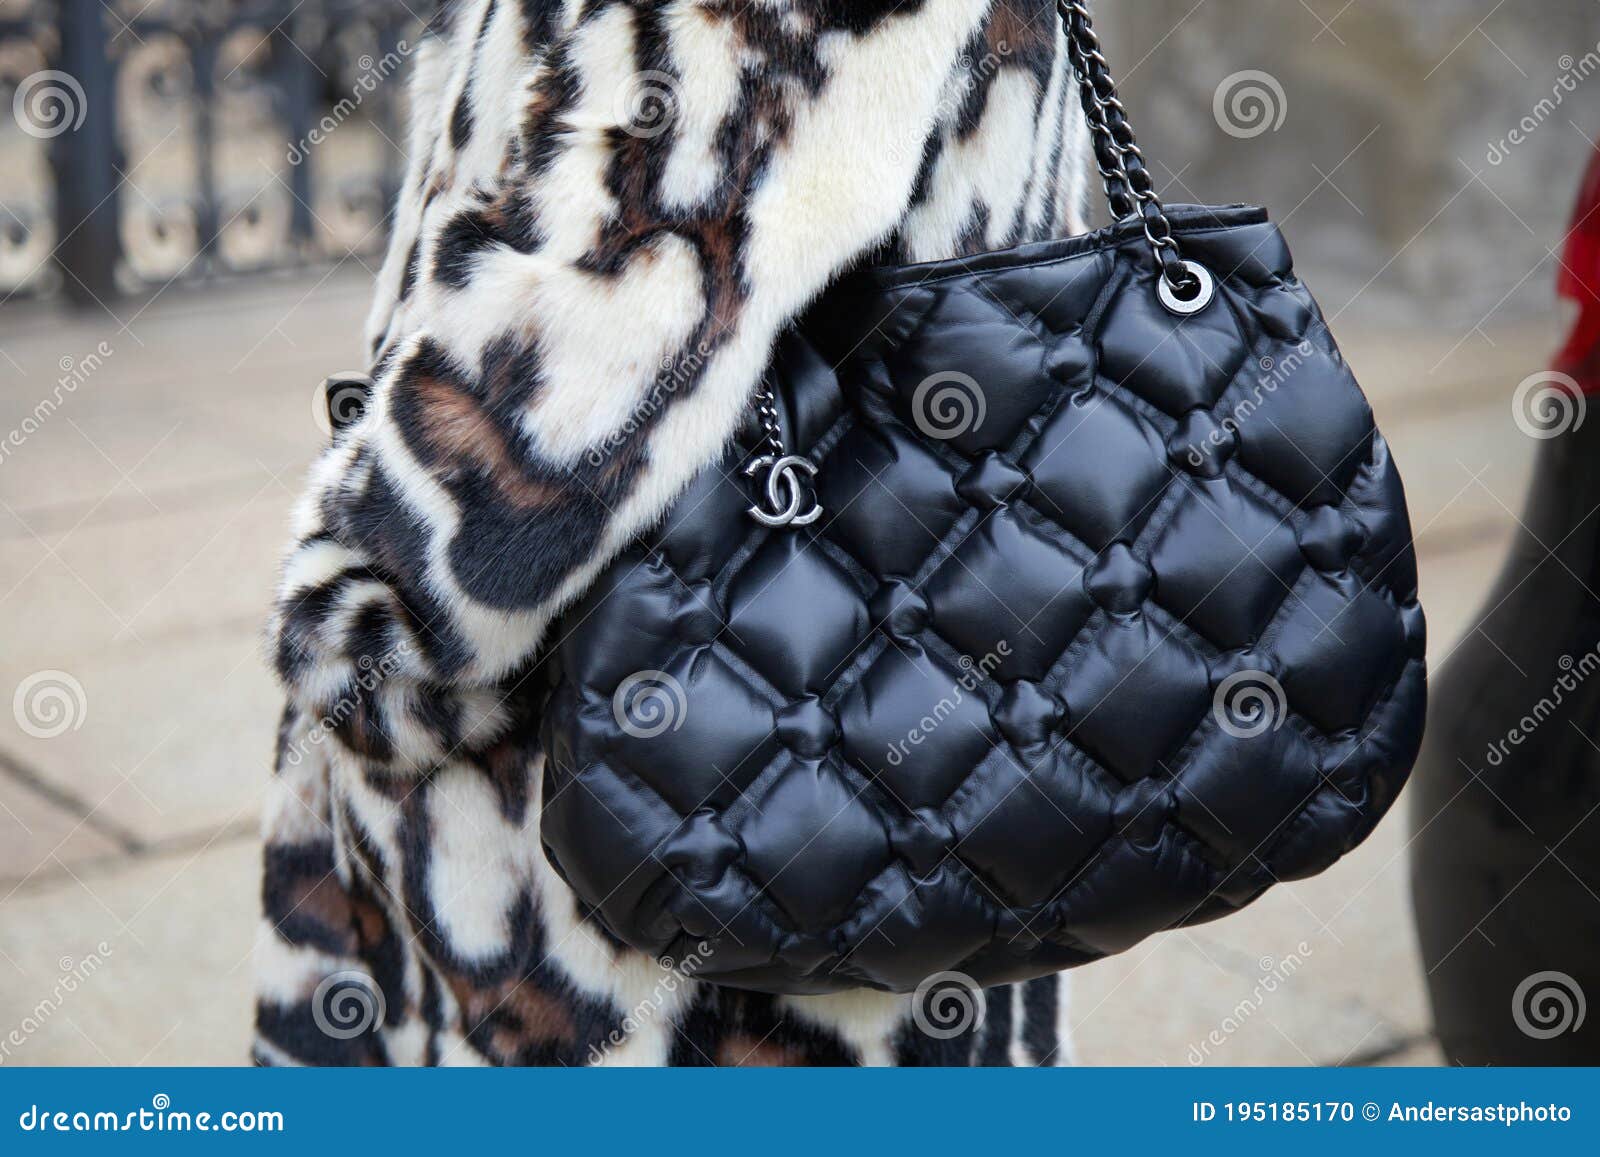 Woman with Black Chanel Soft Leather Bag and Fur Coat before Tods Fashion  Show Milan Fashion Week Street Editorial Image  Image of february coat  195185170